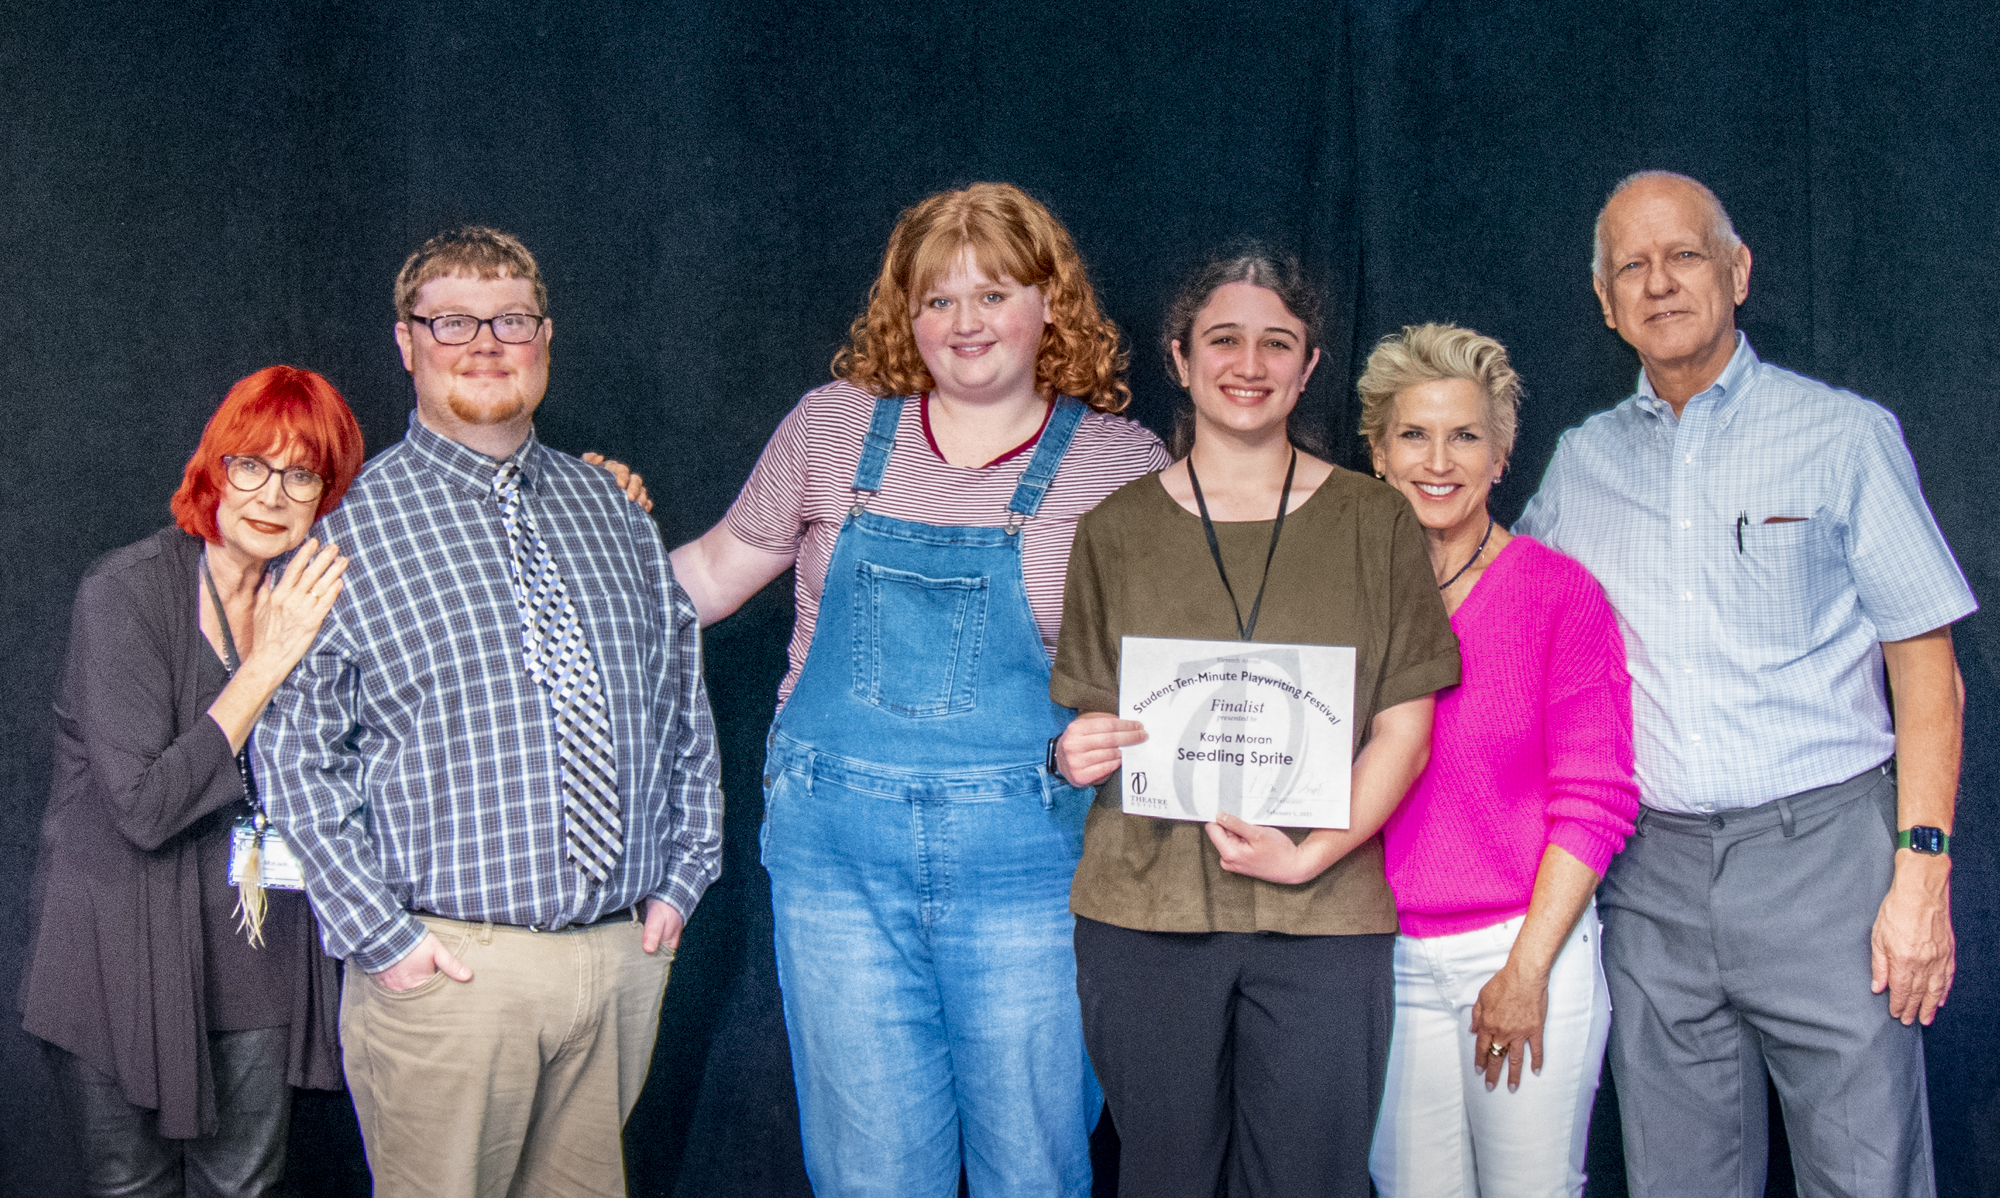 SEEDLING SPRITE—Director Ann Morrison, Nick Schroeder, Claire Timney, playwright Kayla Moran, Amy Goldman, and Joseph Smith.